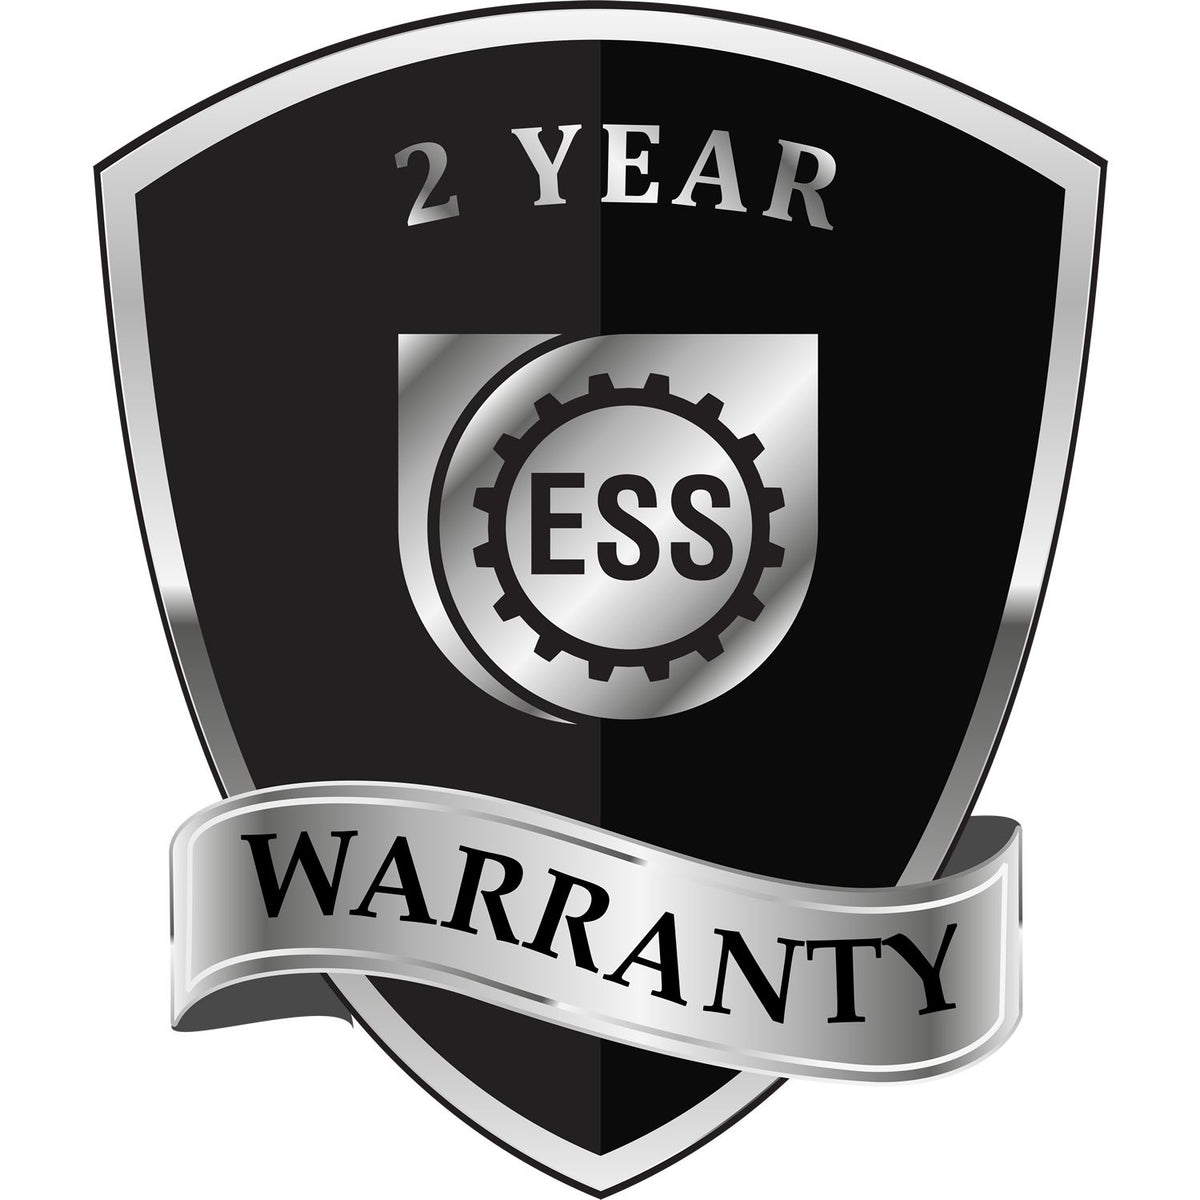 A badge or emblem showing a warranty icon for the State of Louisiana Extended Long Reach Engineer Seal